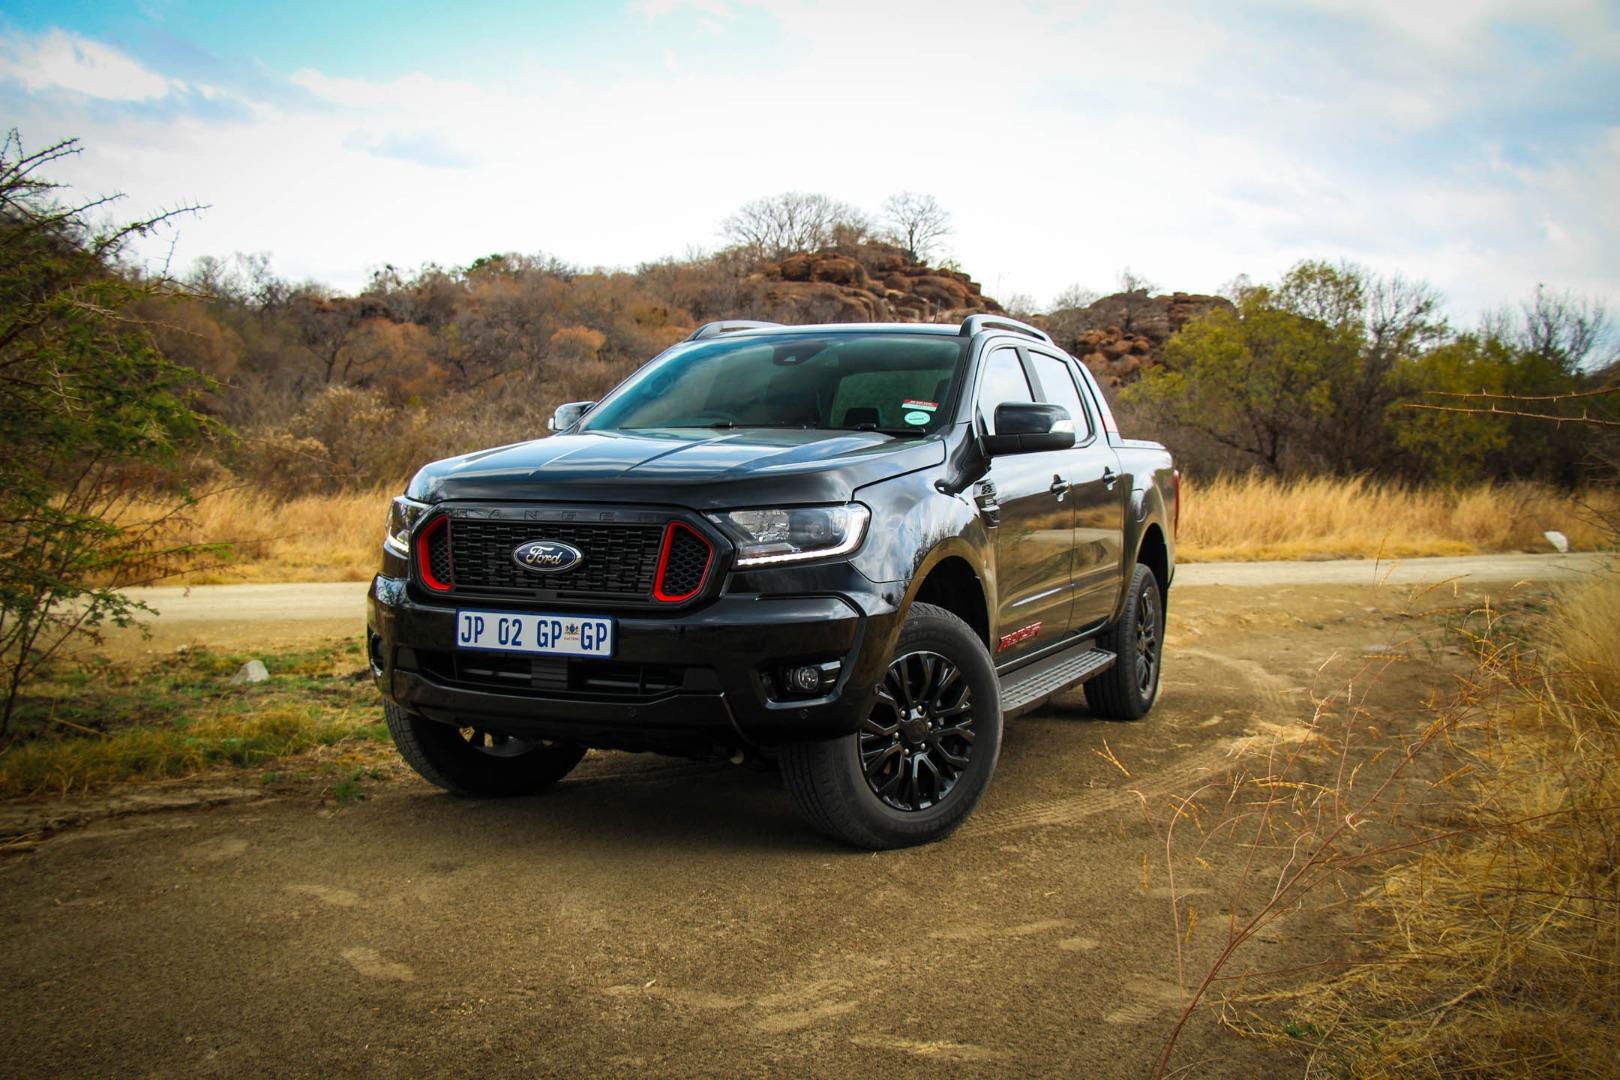 Ford Ranger Thunder (2020) Review - Blowing away the cabin fever